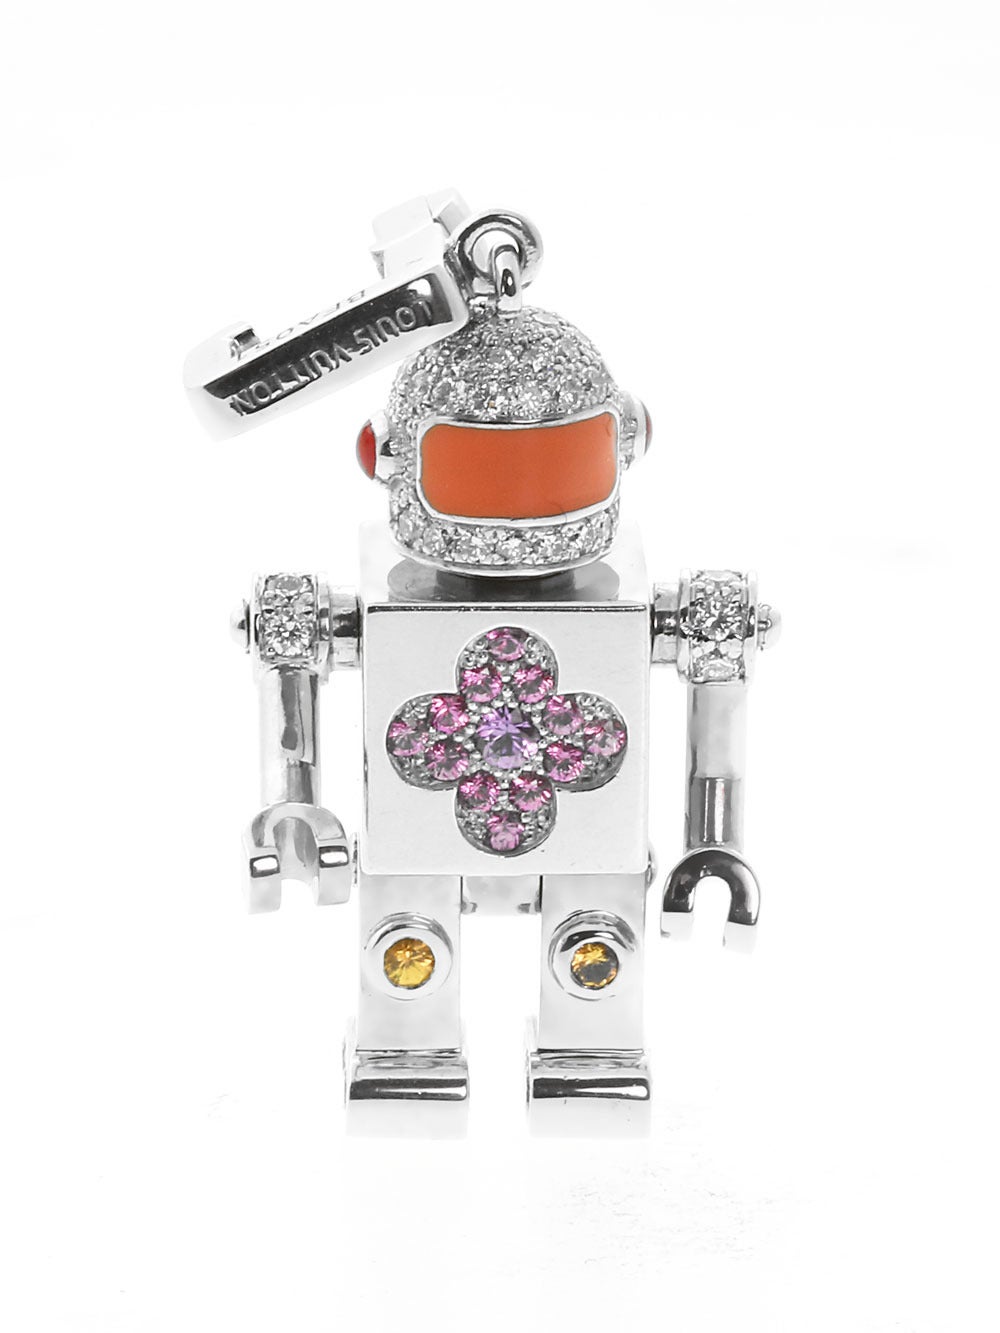 A magnificent authentic Louis Vuitton diamond Spaceman Charm set with a beautiful mix of diamonds and many colored sapphire stones in 18k white gold.

Dimensions: .66″ Wide by 1.10″ in Length
Inventory ID: 0000199

Louis Vuitton Retail Price :